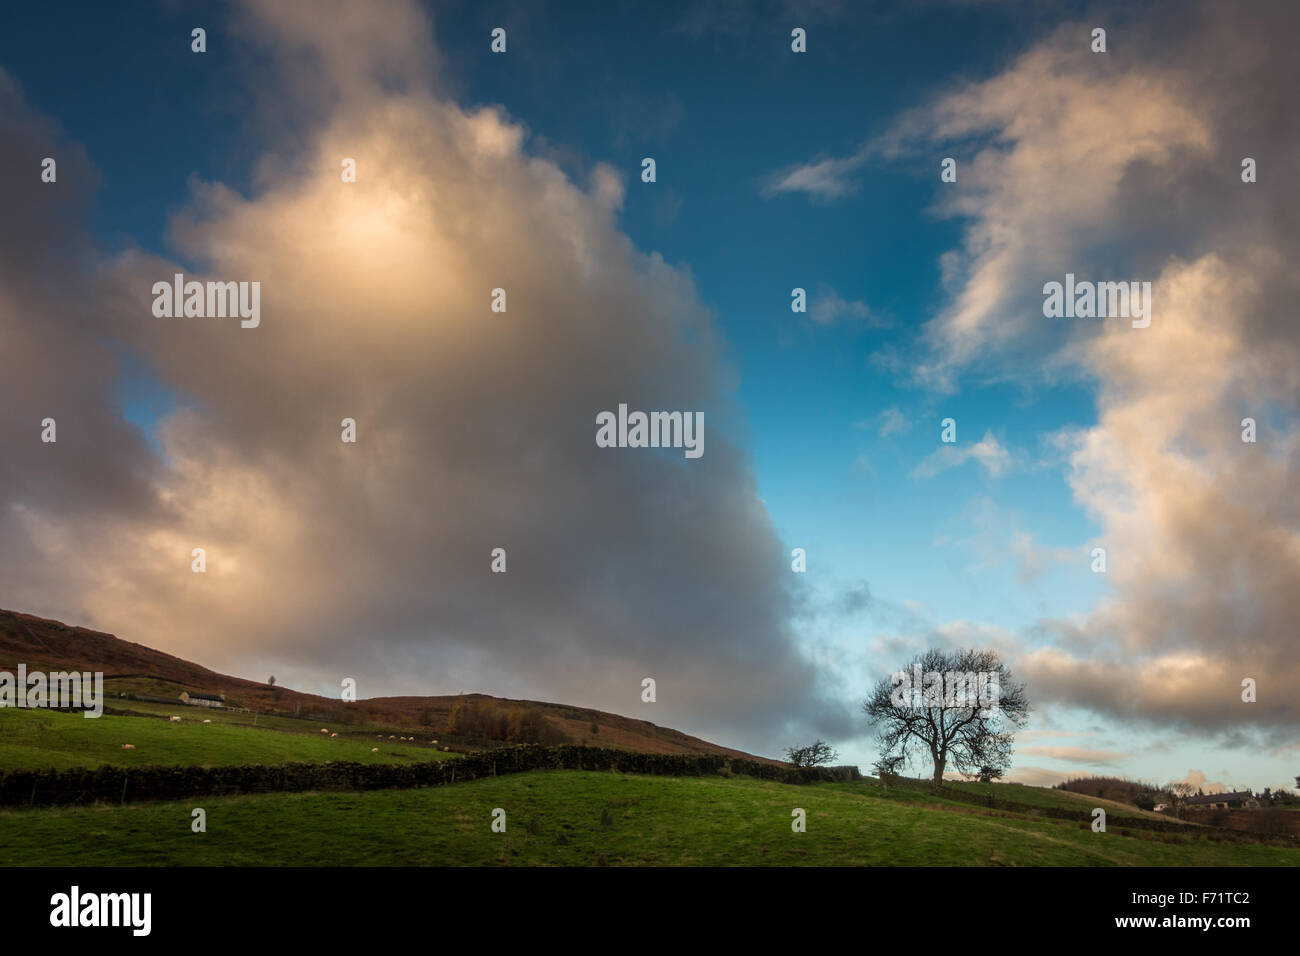 Tree on a hill sandwiched inbetween two giant clouds and blue sky Stock Photo